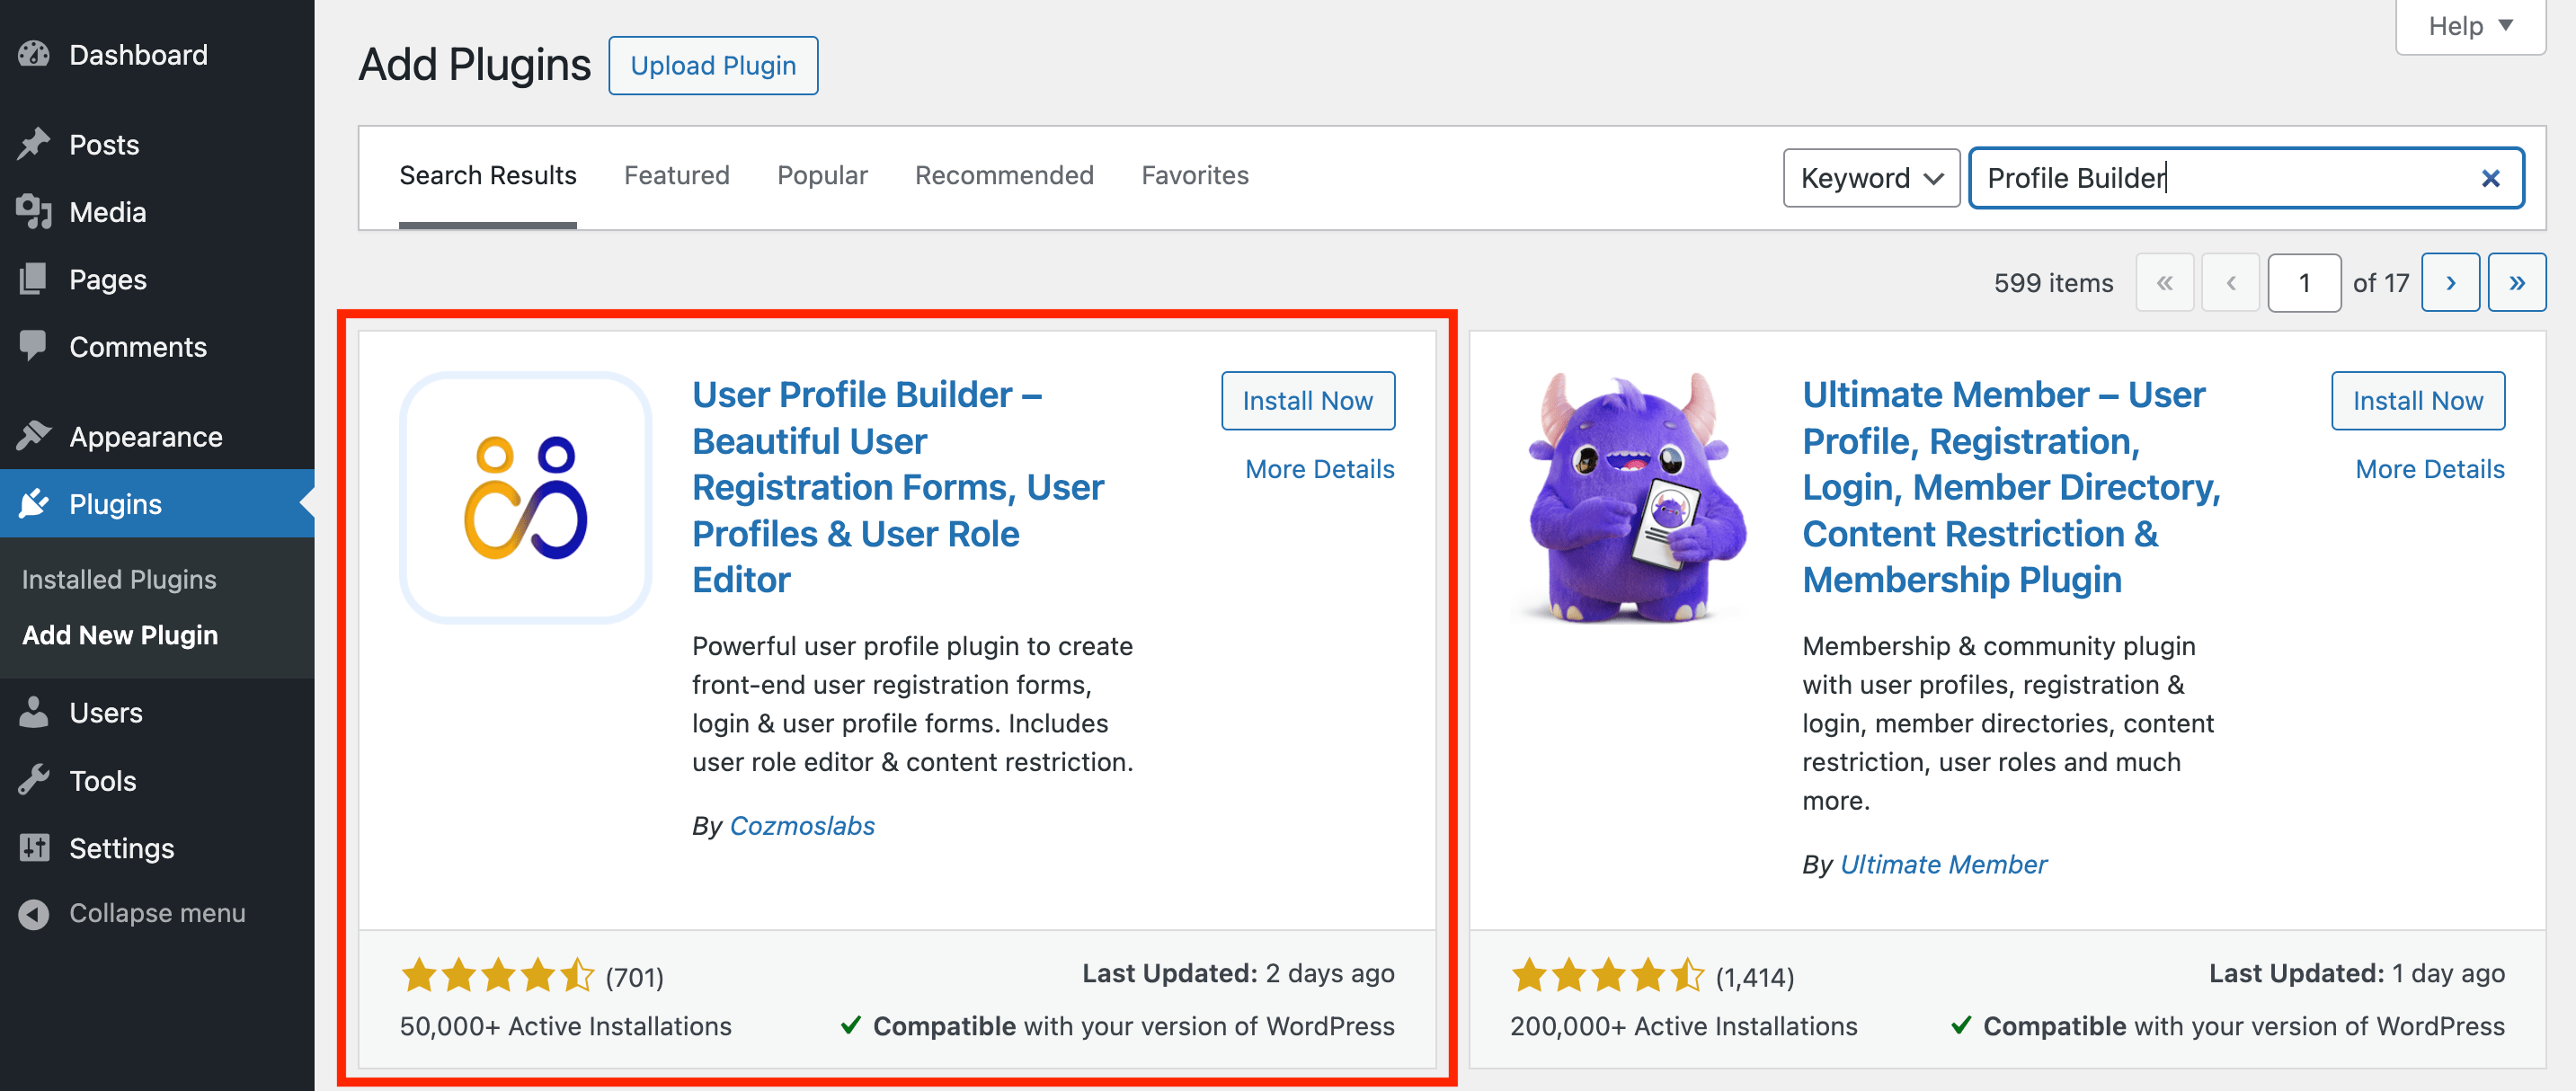 Installing the free Profile Builder plugin for WordPress to password protect content